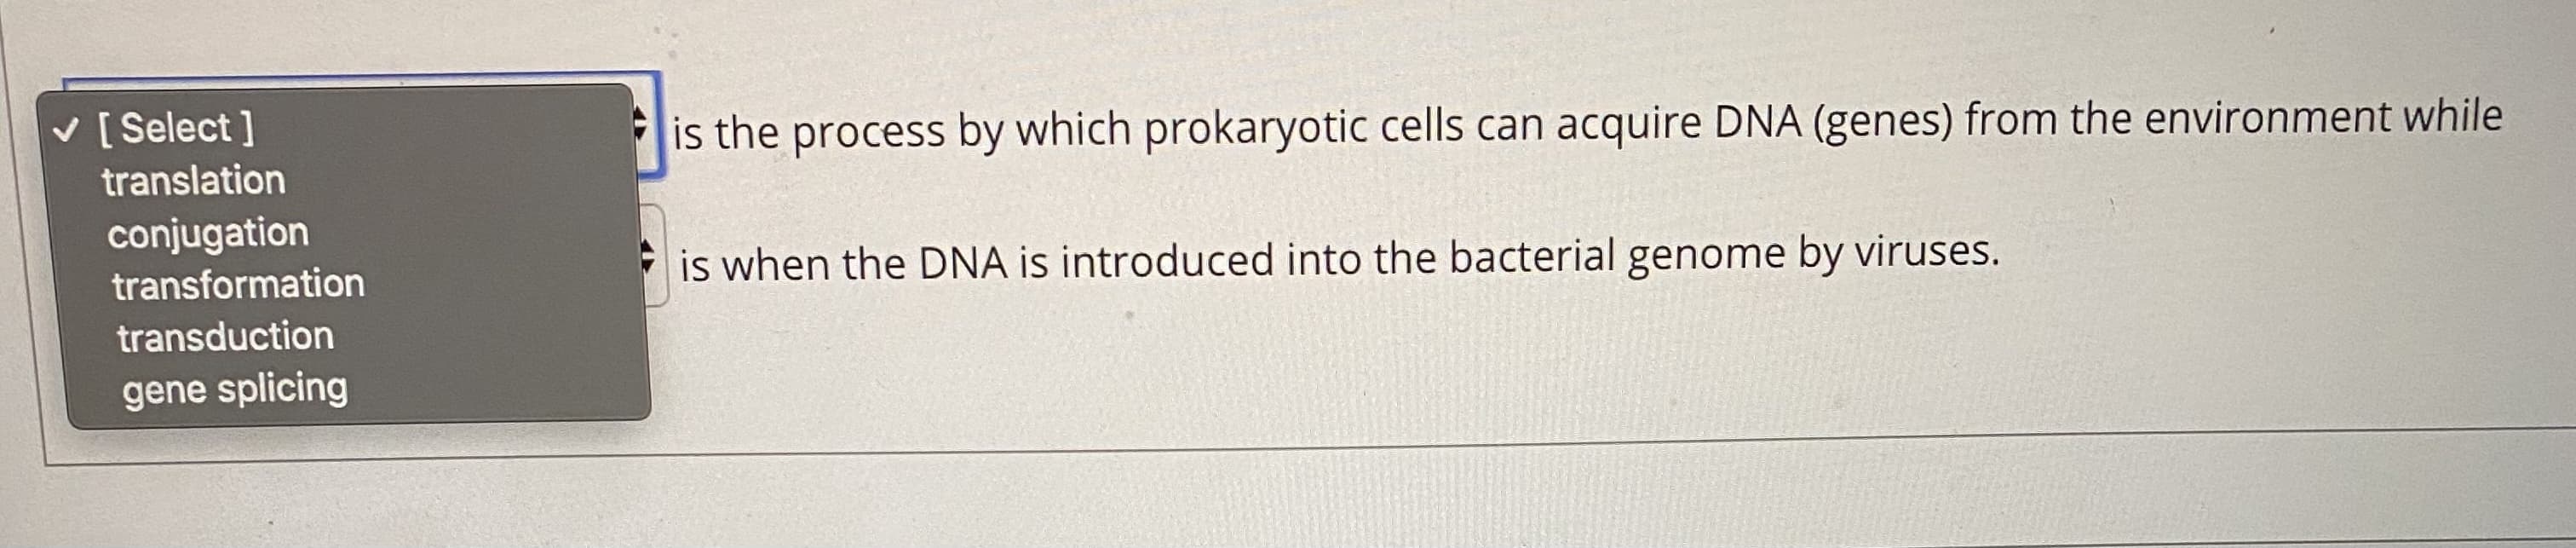 is the process by which prokaryotic cells can acquire DNA (genes) from the environment while
is when the DNA is introduced into the bacterial genome by viruses.
